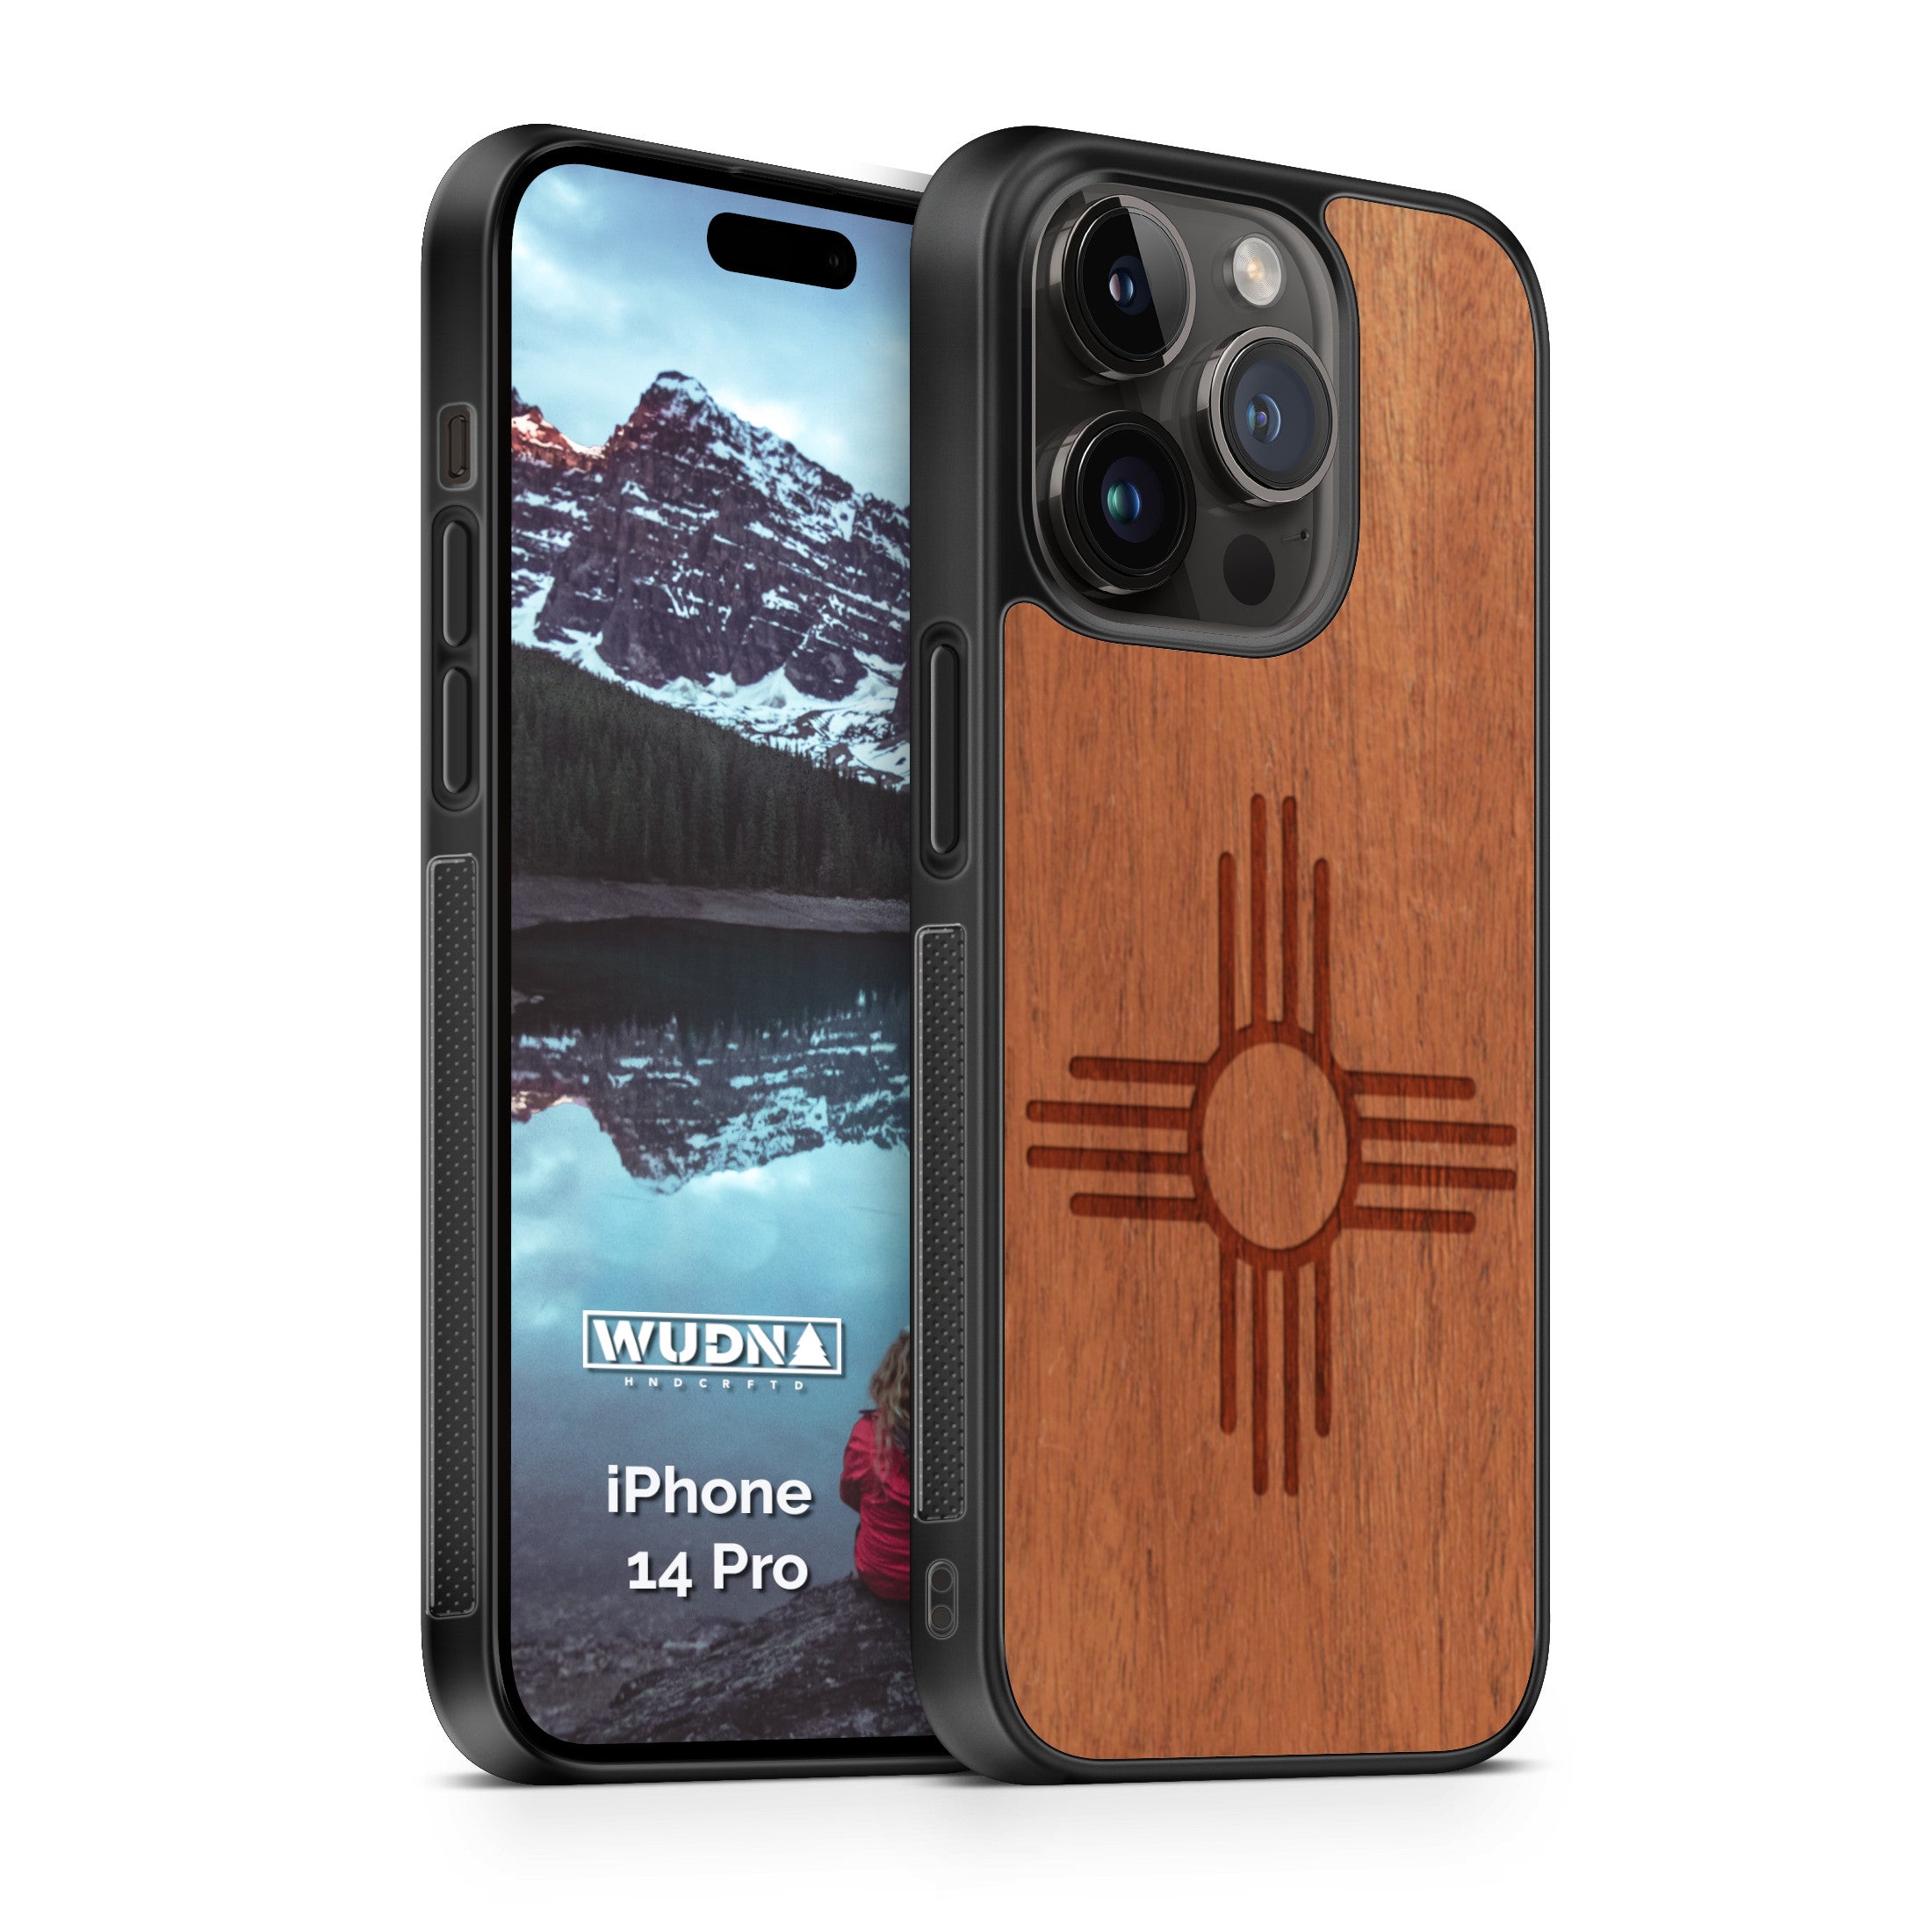 Slim Wooden iPhone Case (New Mexico State Flag in Mahogany)